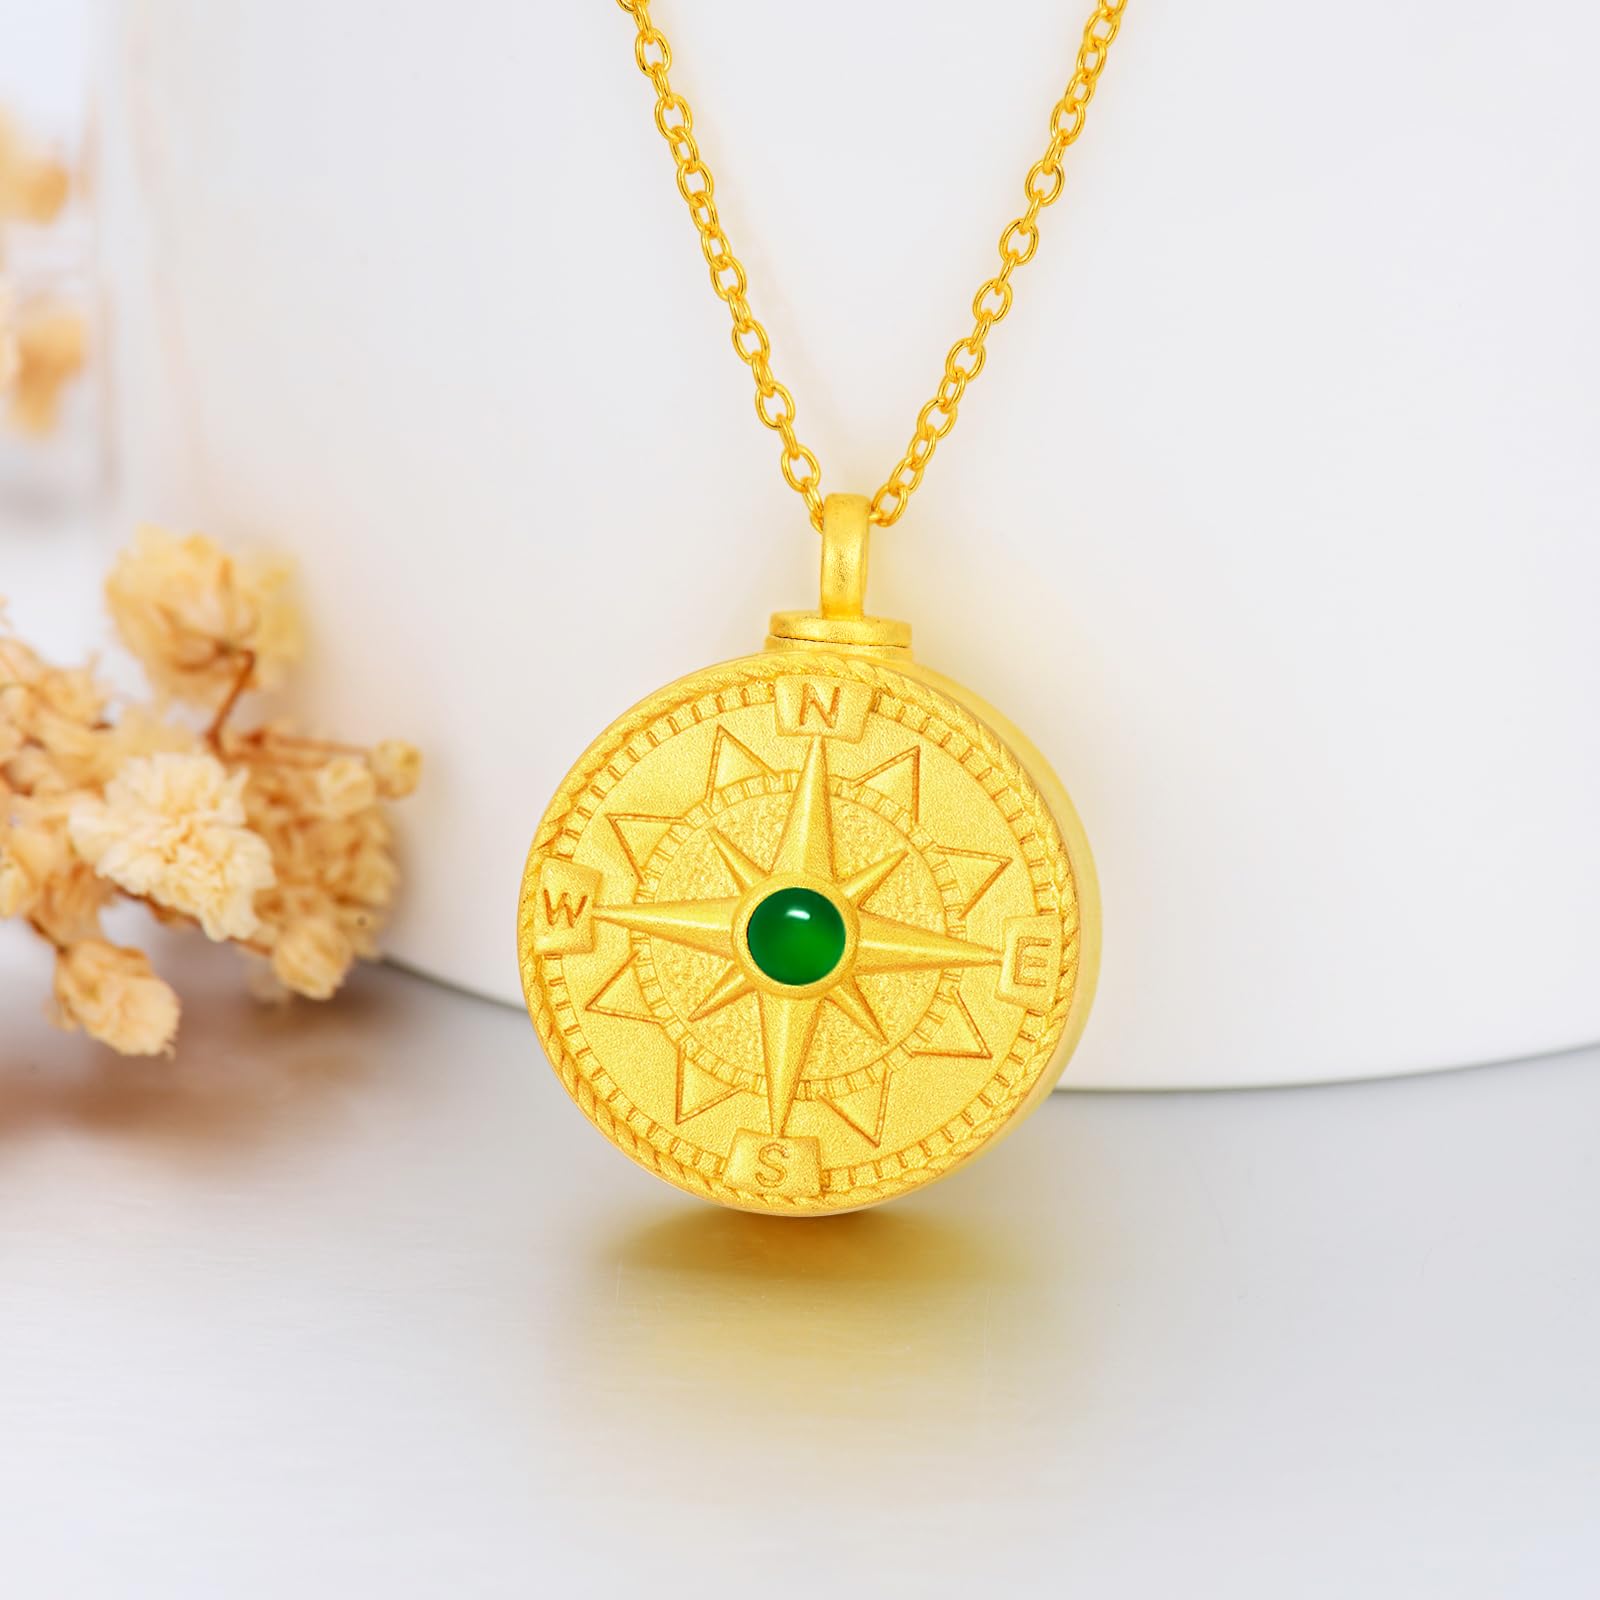 SOULMEET Gold Emerald Cremation Jewelry for Ashes, Personalized Gold Sunflower/Lotus/Rose/Cross/Medal Round Ashes Locket Necklace Natural Gemstone Urn Necklace Custom Dainty Gold Chain